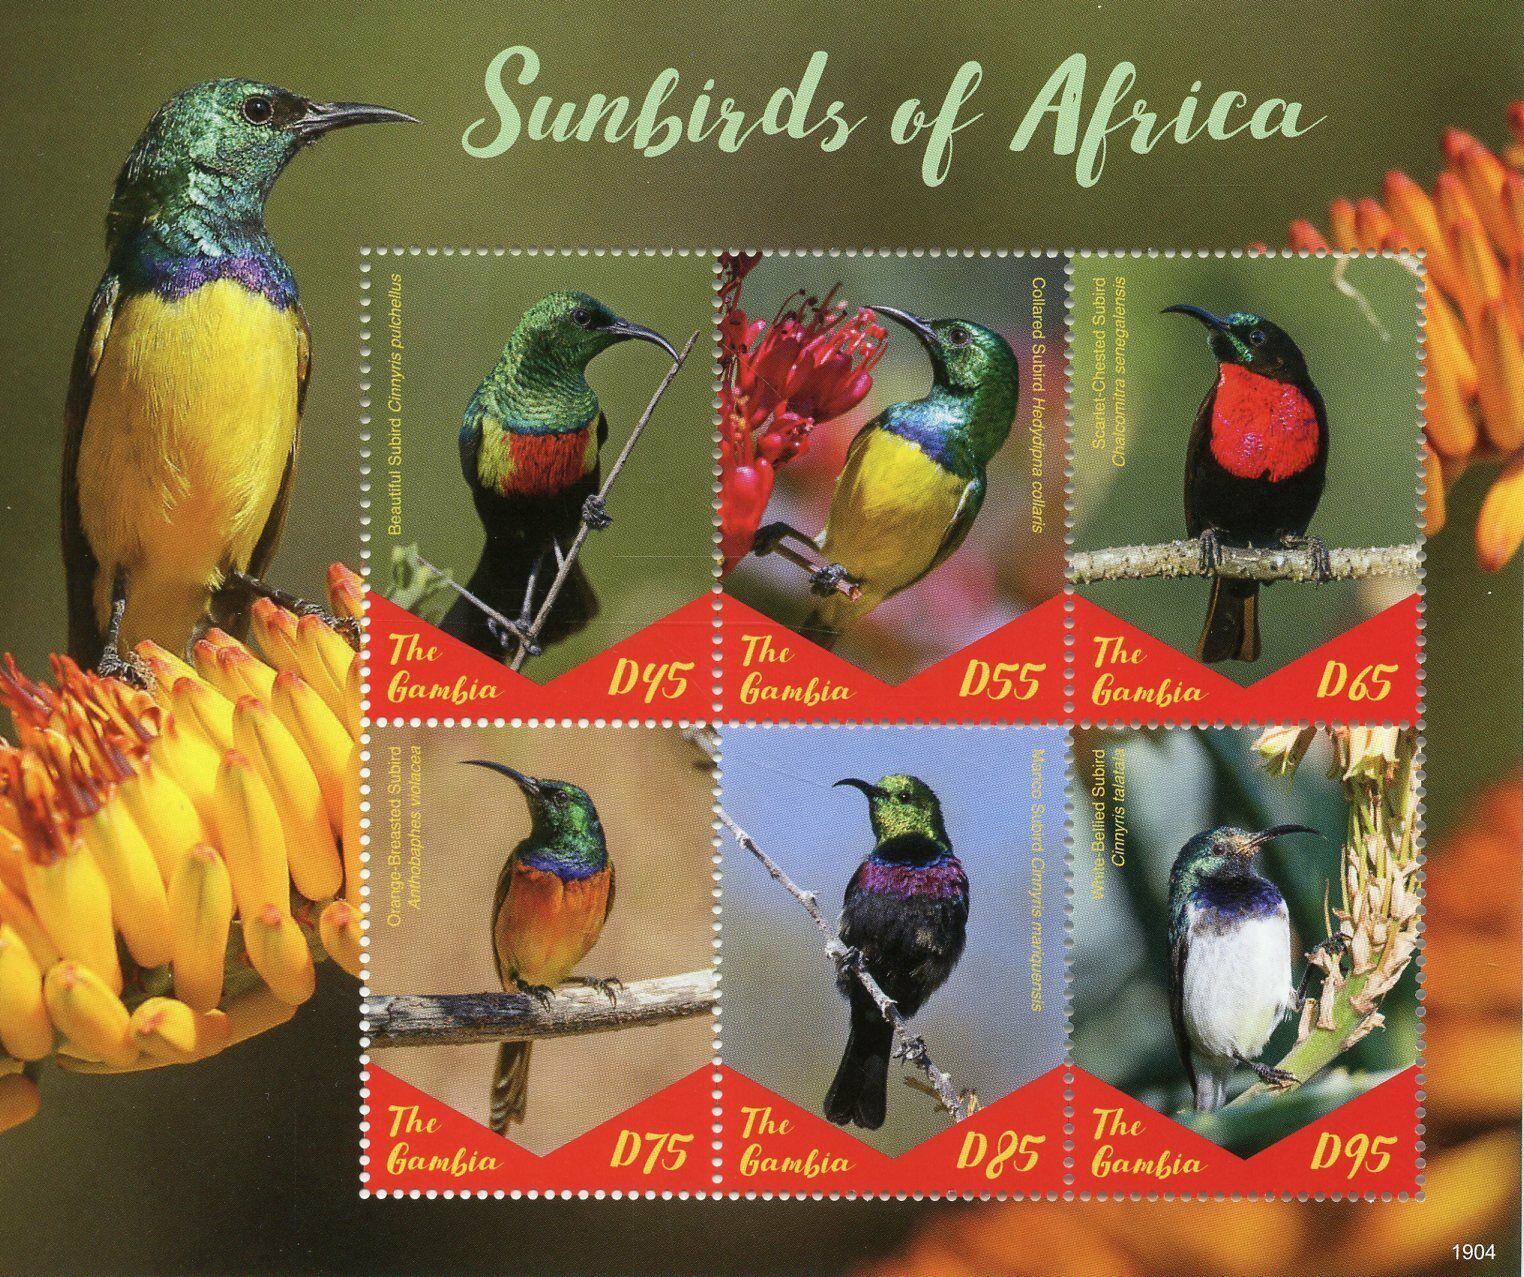 Gambia 2019 MNH Birds on Stamps Sunbirds of Africa Collared Marico Sunbird 6v M/S